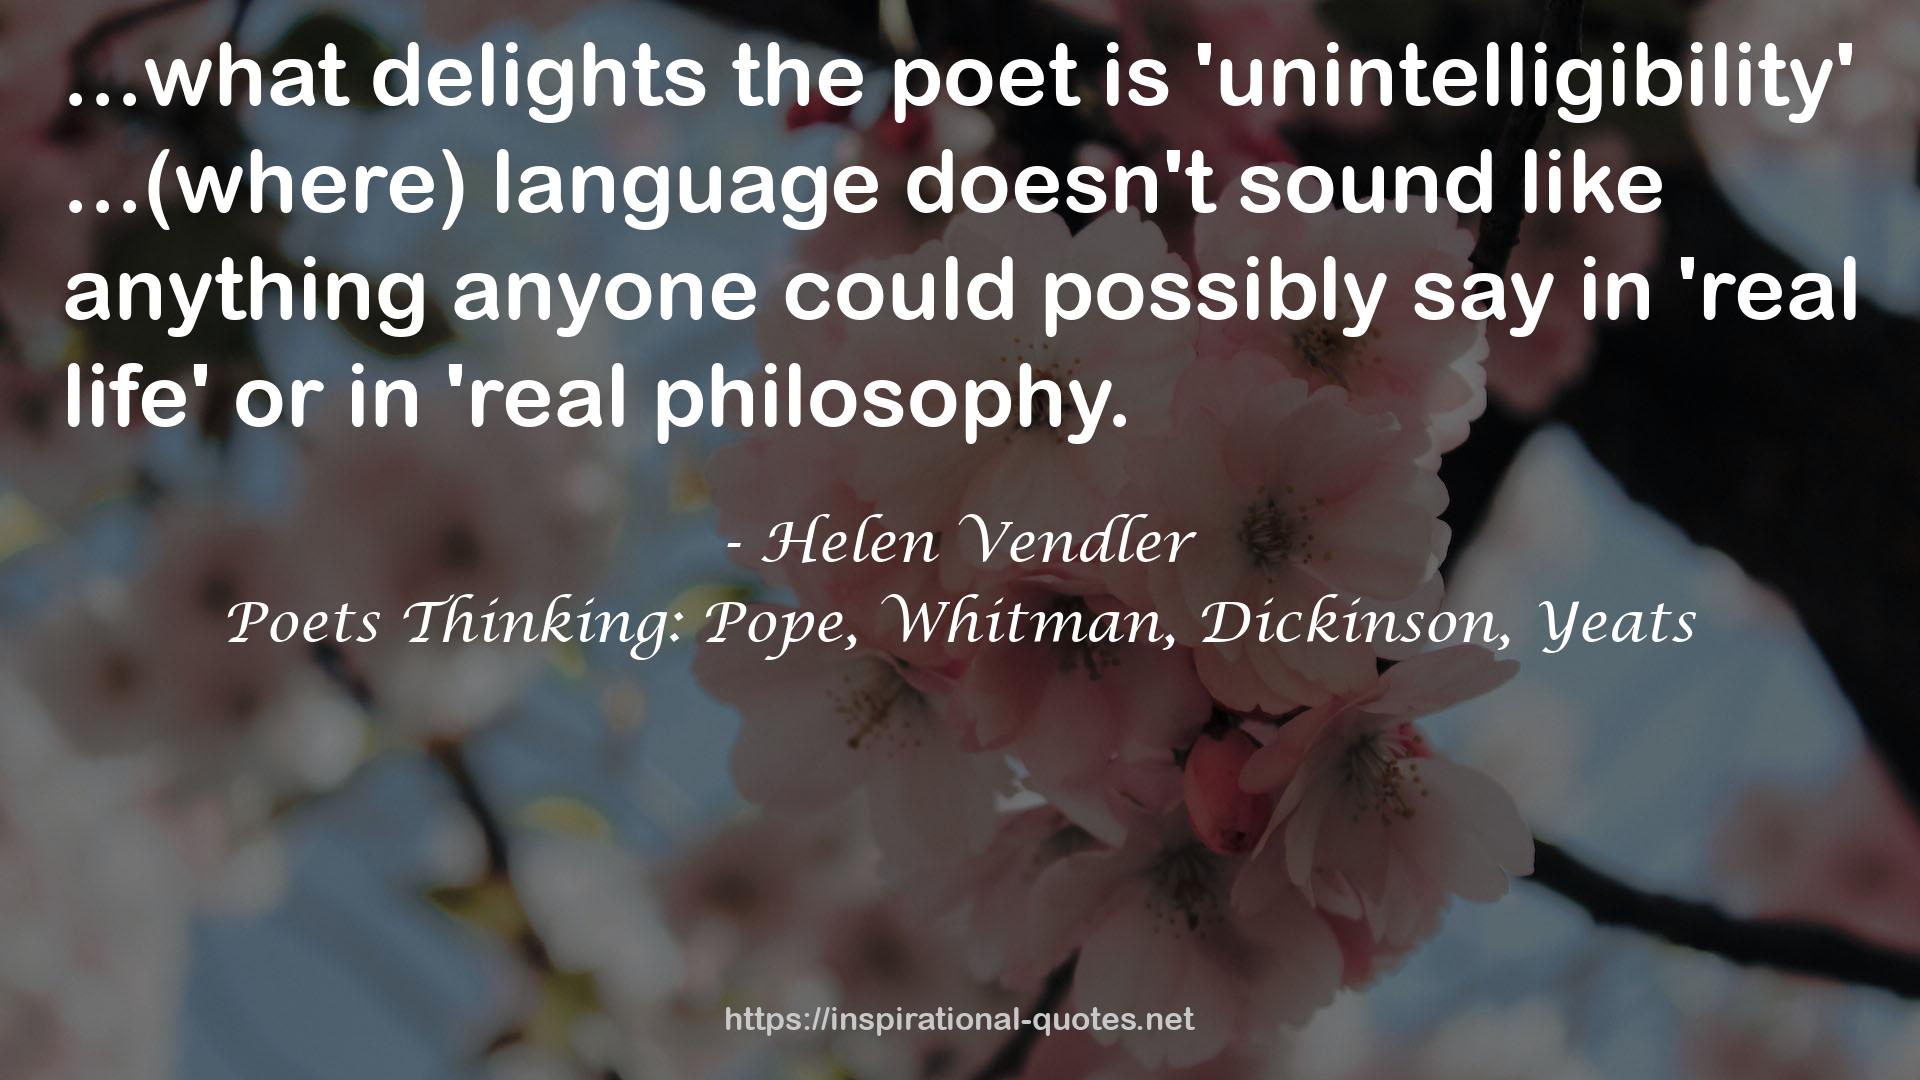 Poets Thinking: Pope, Whitman, Dickinson, Yeats QUOTES